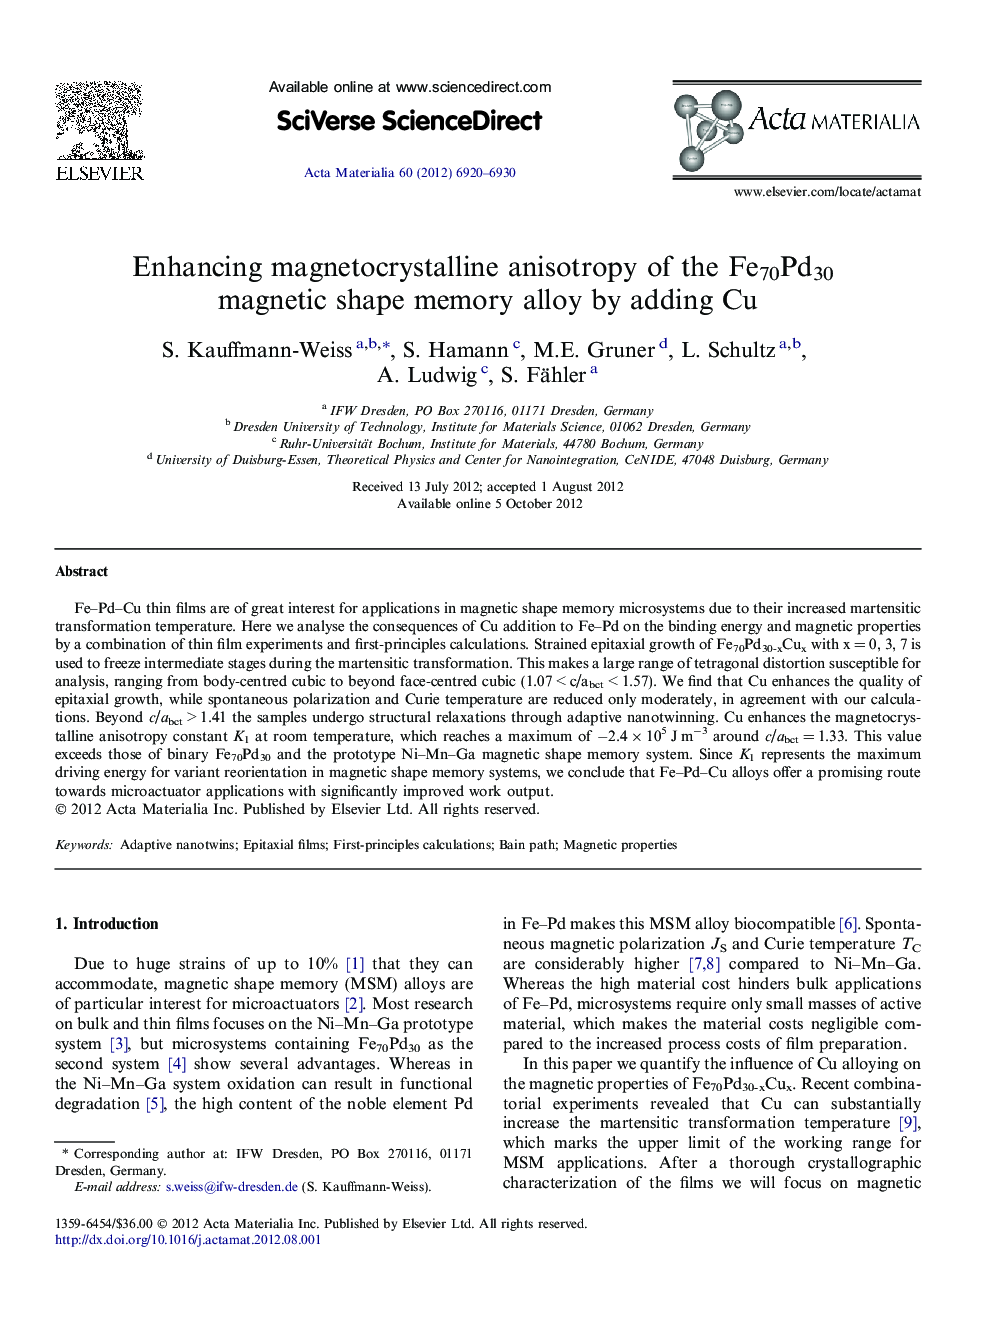 Enhancing magnetocrystalline anisotropy of the Fe70Pd30 magnetic shape memory alloy by adding Cu